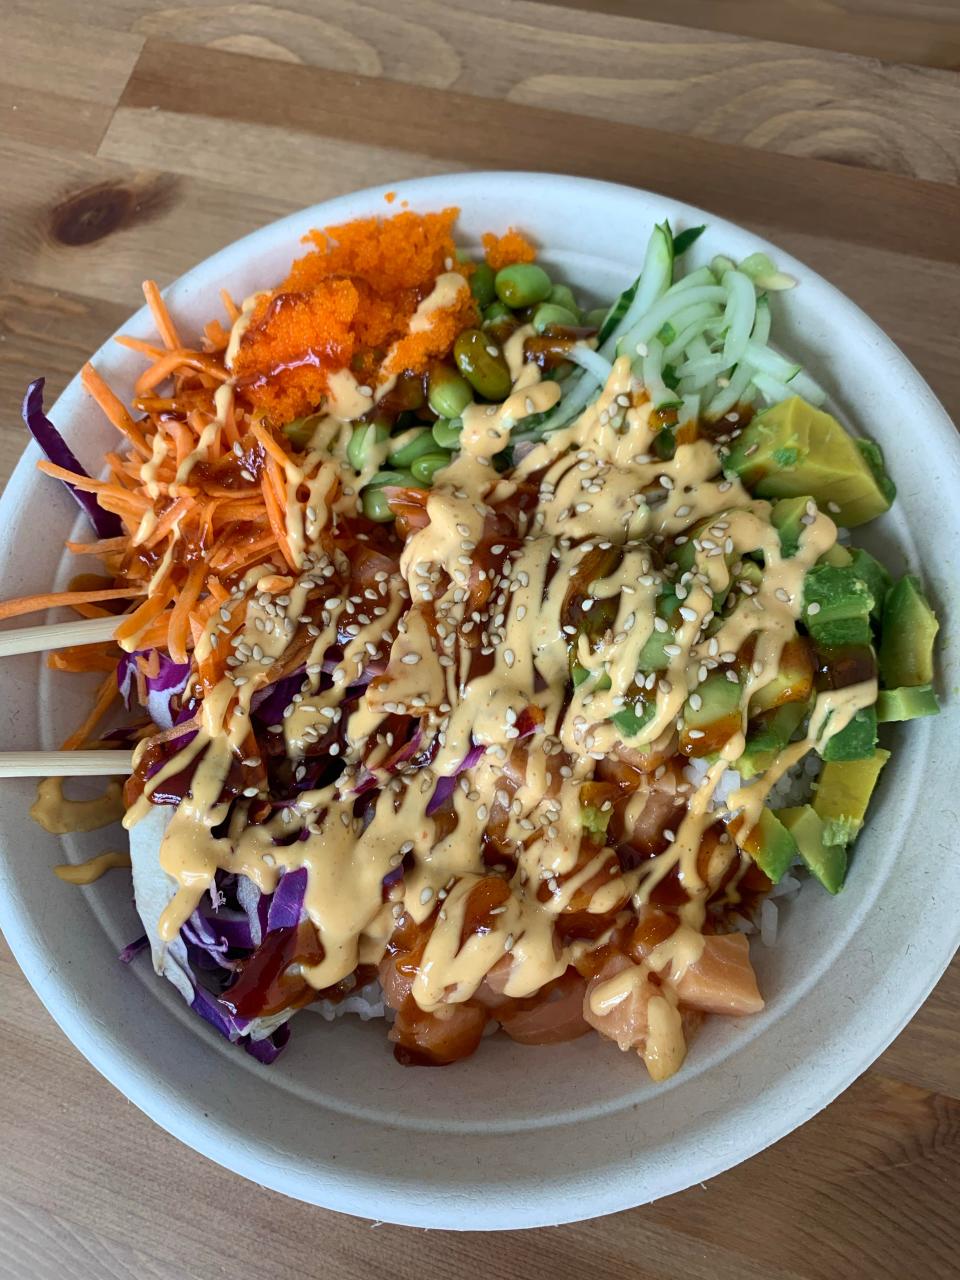 A build-your-own poke bowl at Poke & Roll features rice, spicy salmon, cucumber, carrot, edamame, red cabbage and avocado. Toppings are spicy mayor, Gochujiang sauce, toasted sesame seeds, masago (fish roe) and sushi ginger.